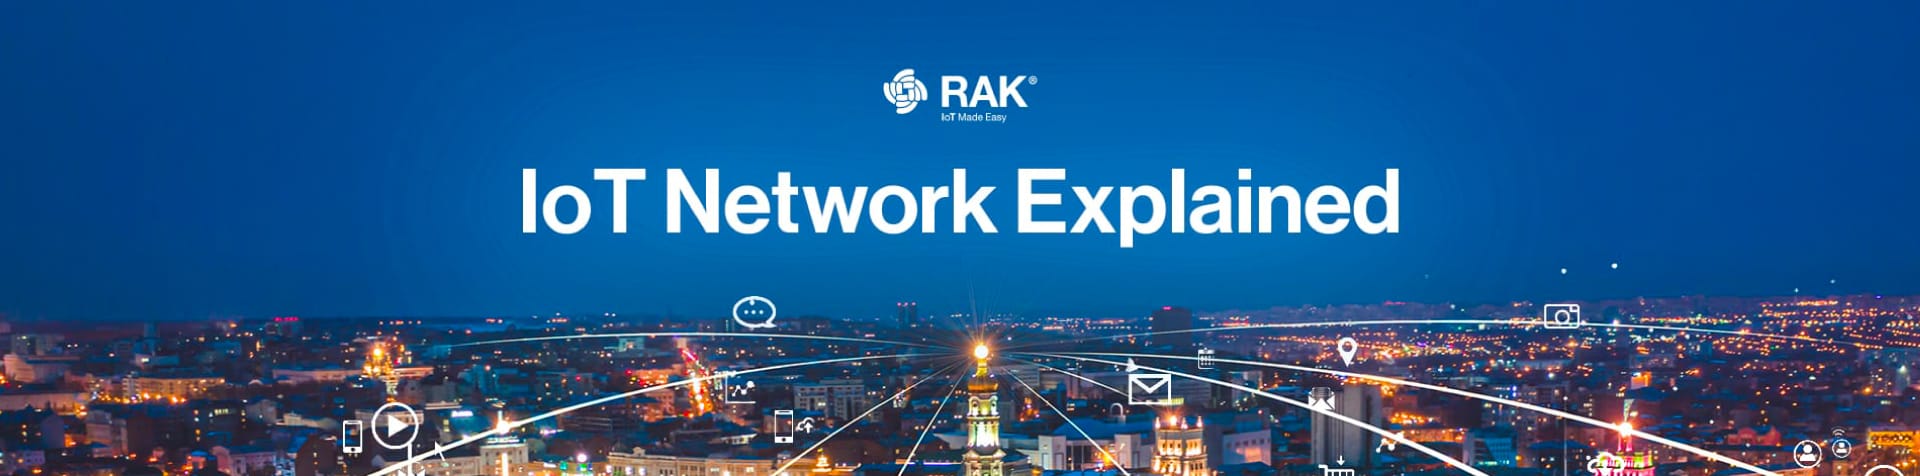 Monthly Digest: Embedded World 2024, RAK2270 New Integration, Certification News, and More